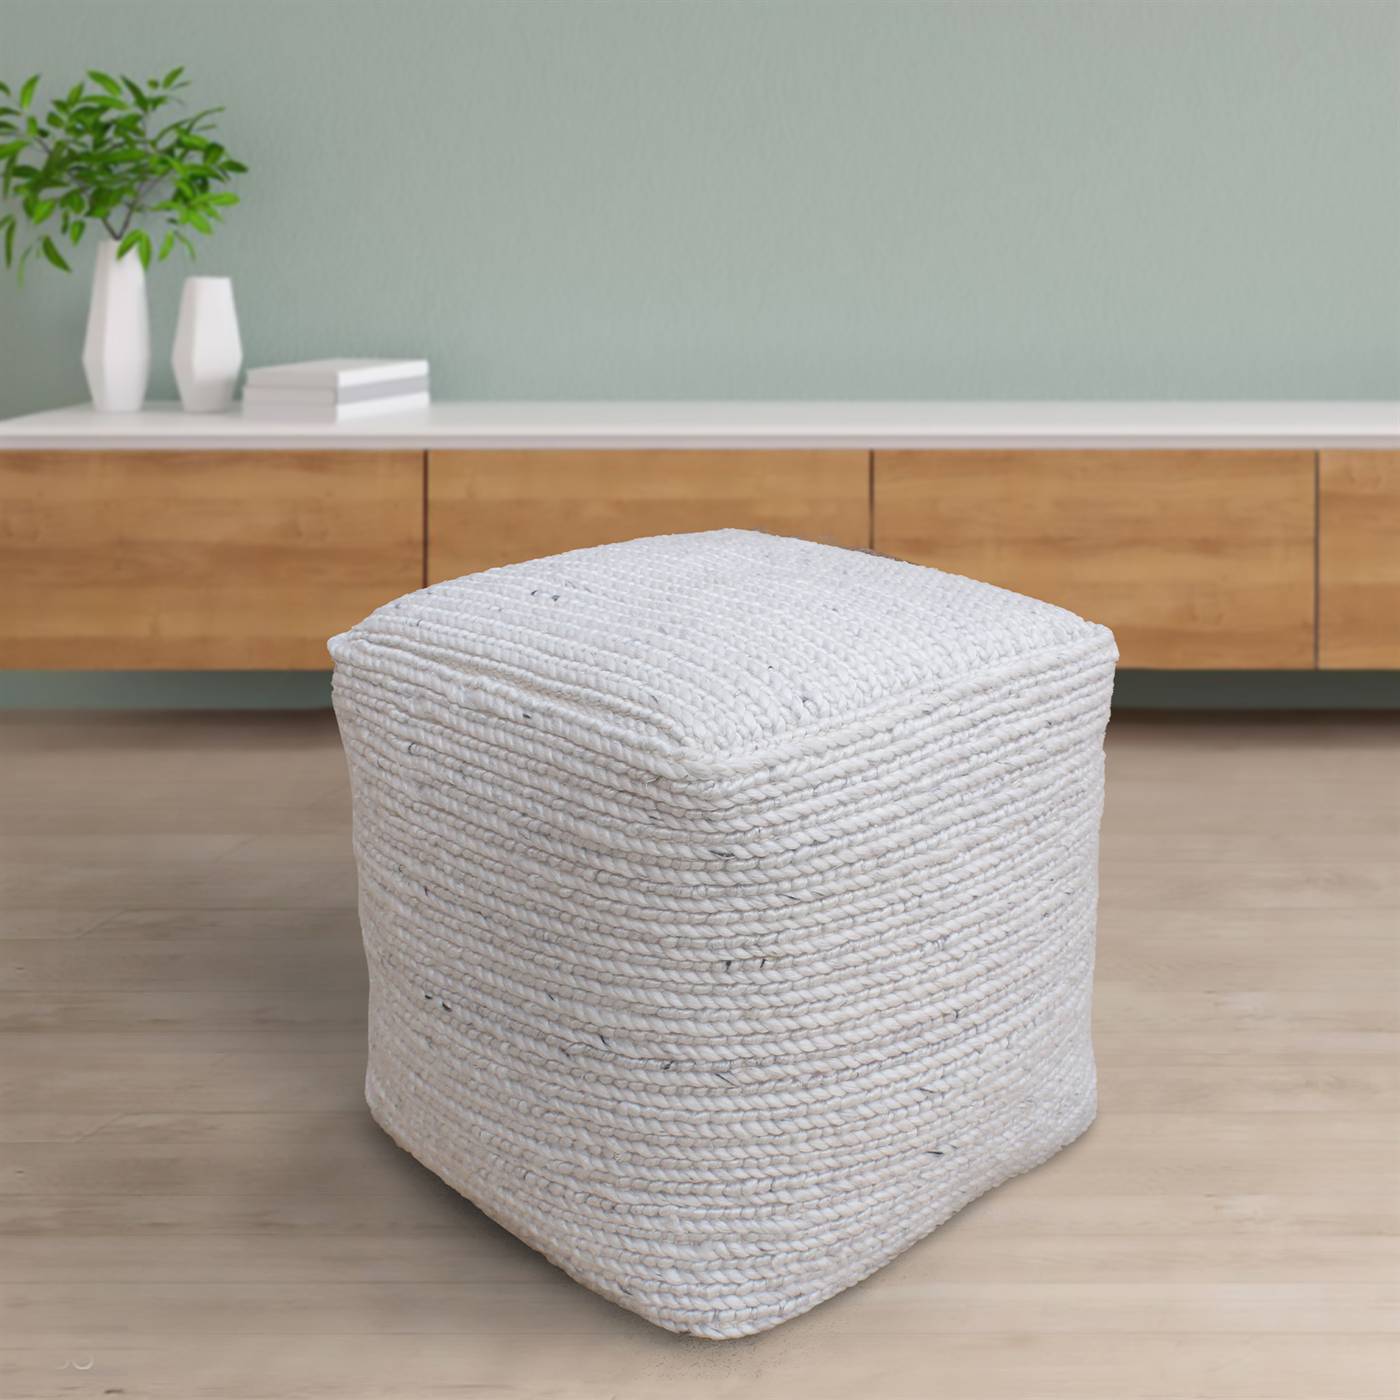 Abingdon-II Pouf, 40x40x40 cm, Natural White, PET, Hand Woven, Pitloom, All Loop